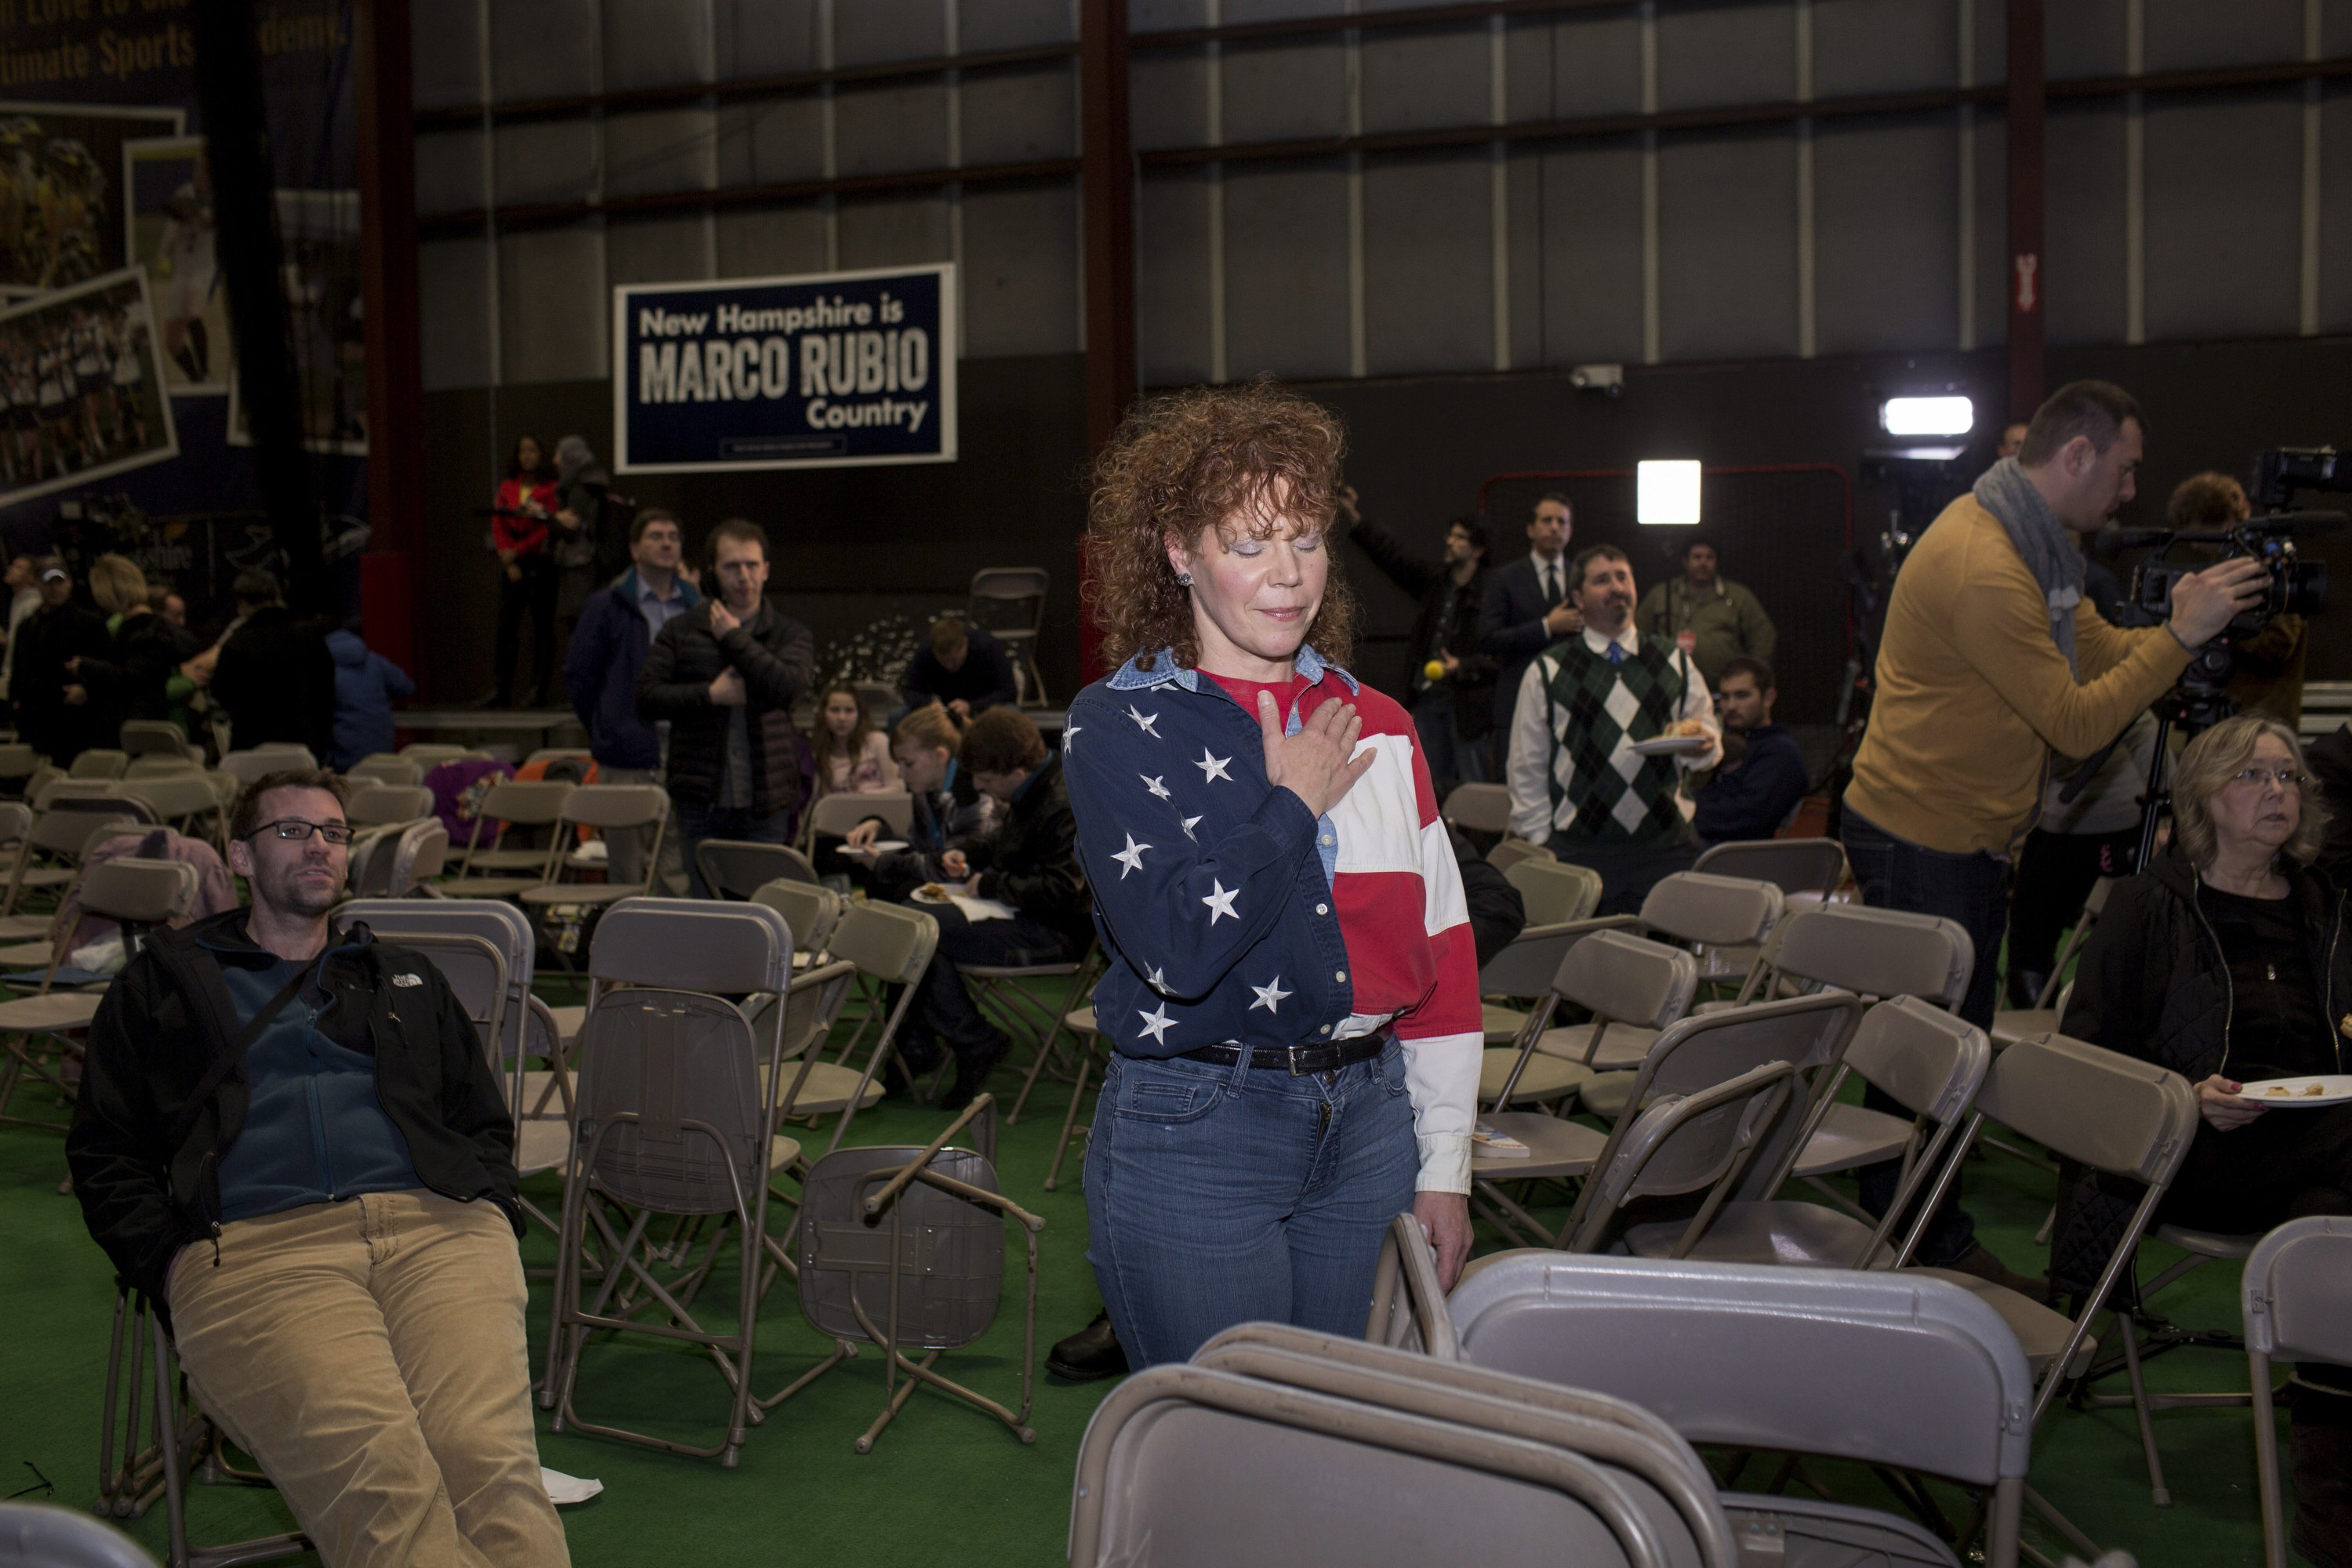 A supporter attends a campaign event for Republican presidential candidate Marco Rubio in Manchester, N.H. on  Feb. 7.